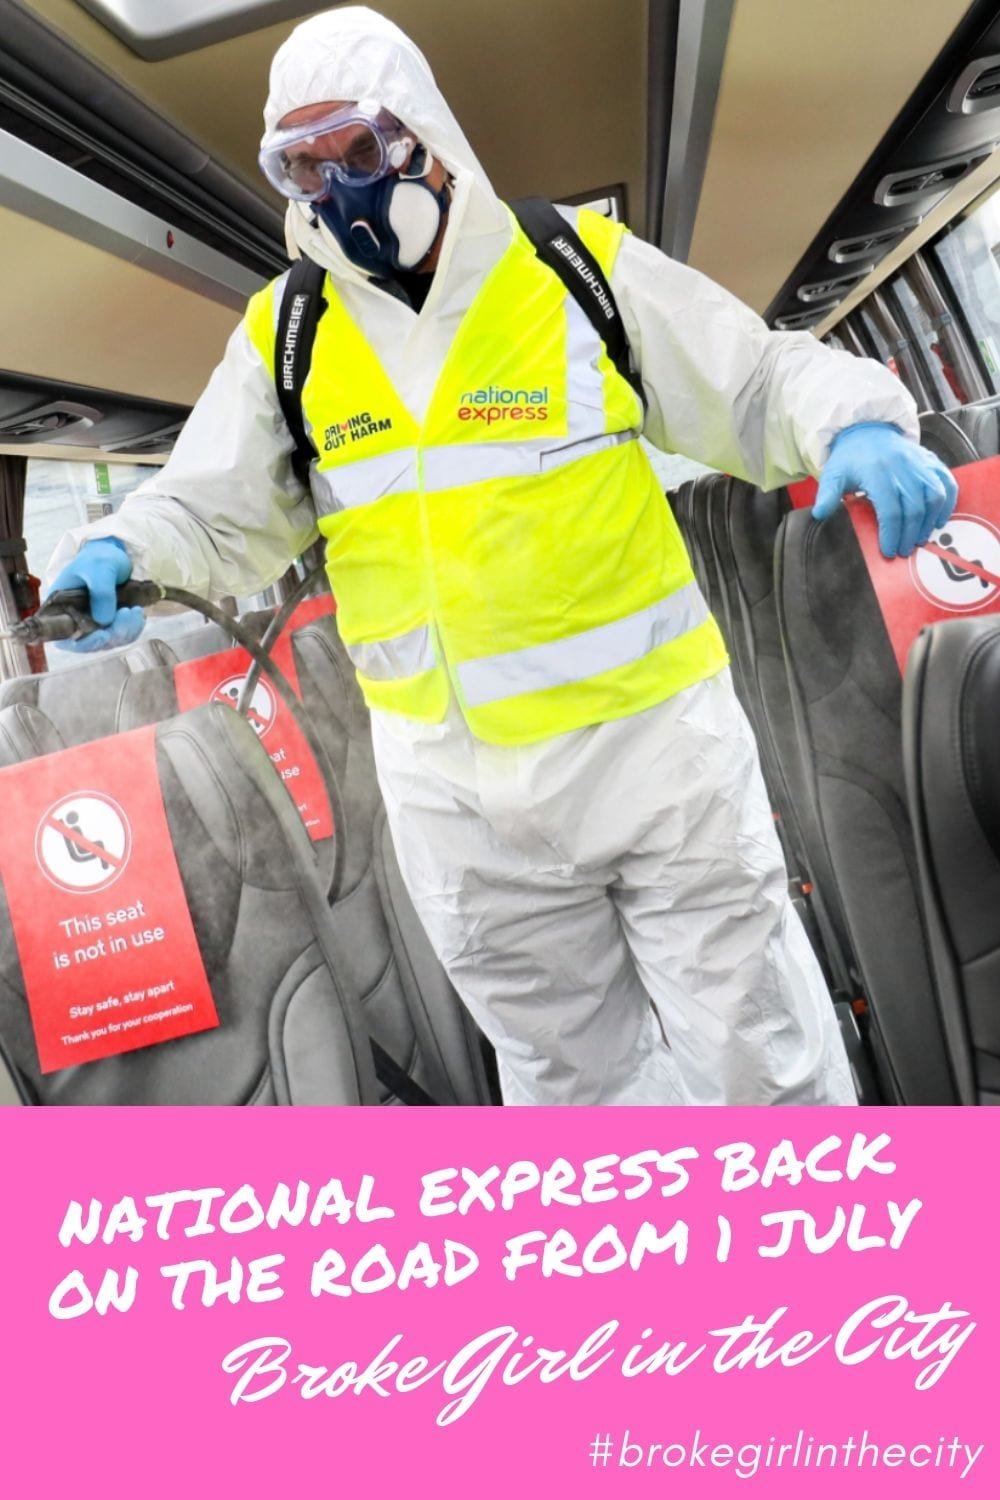 National Express back on the road from 1 July